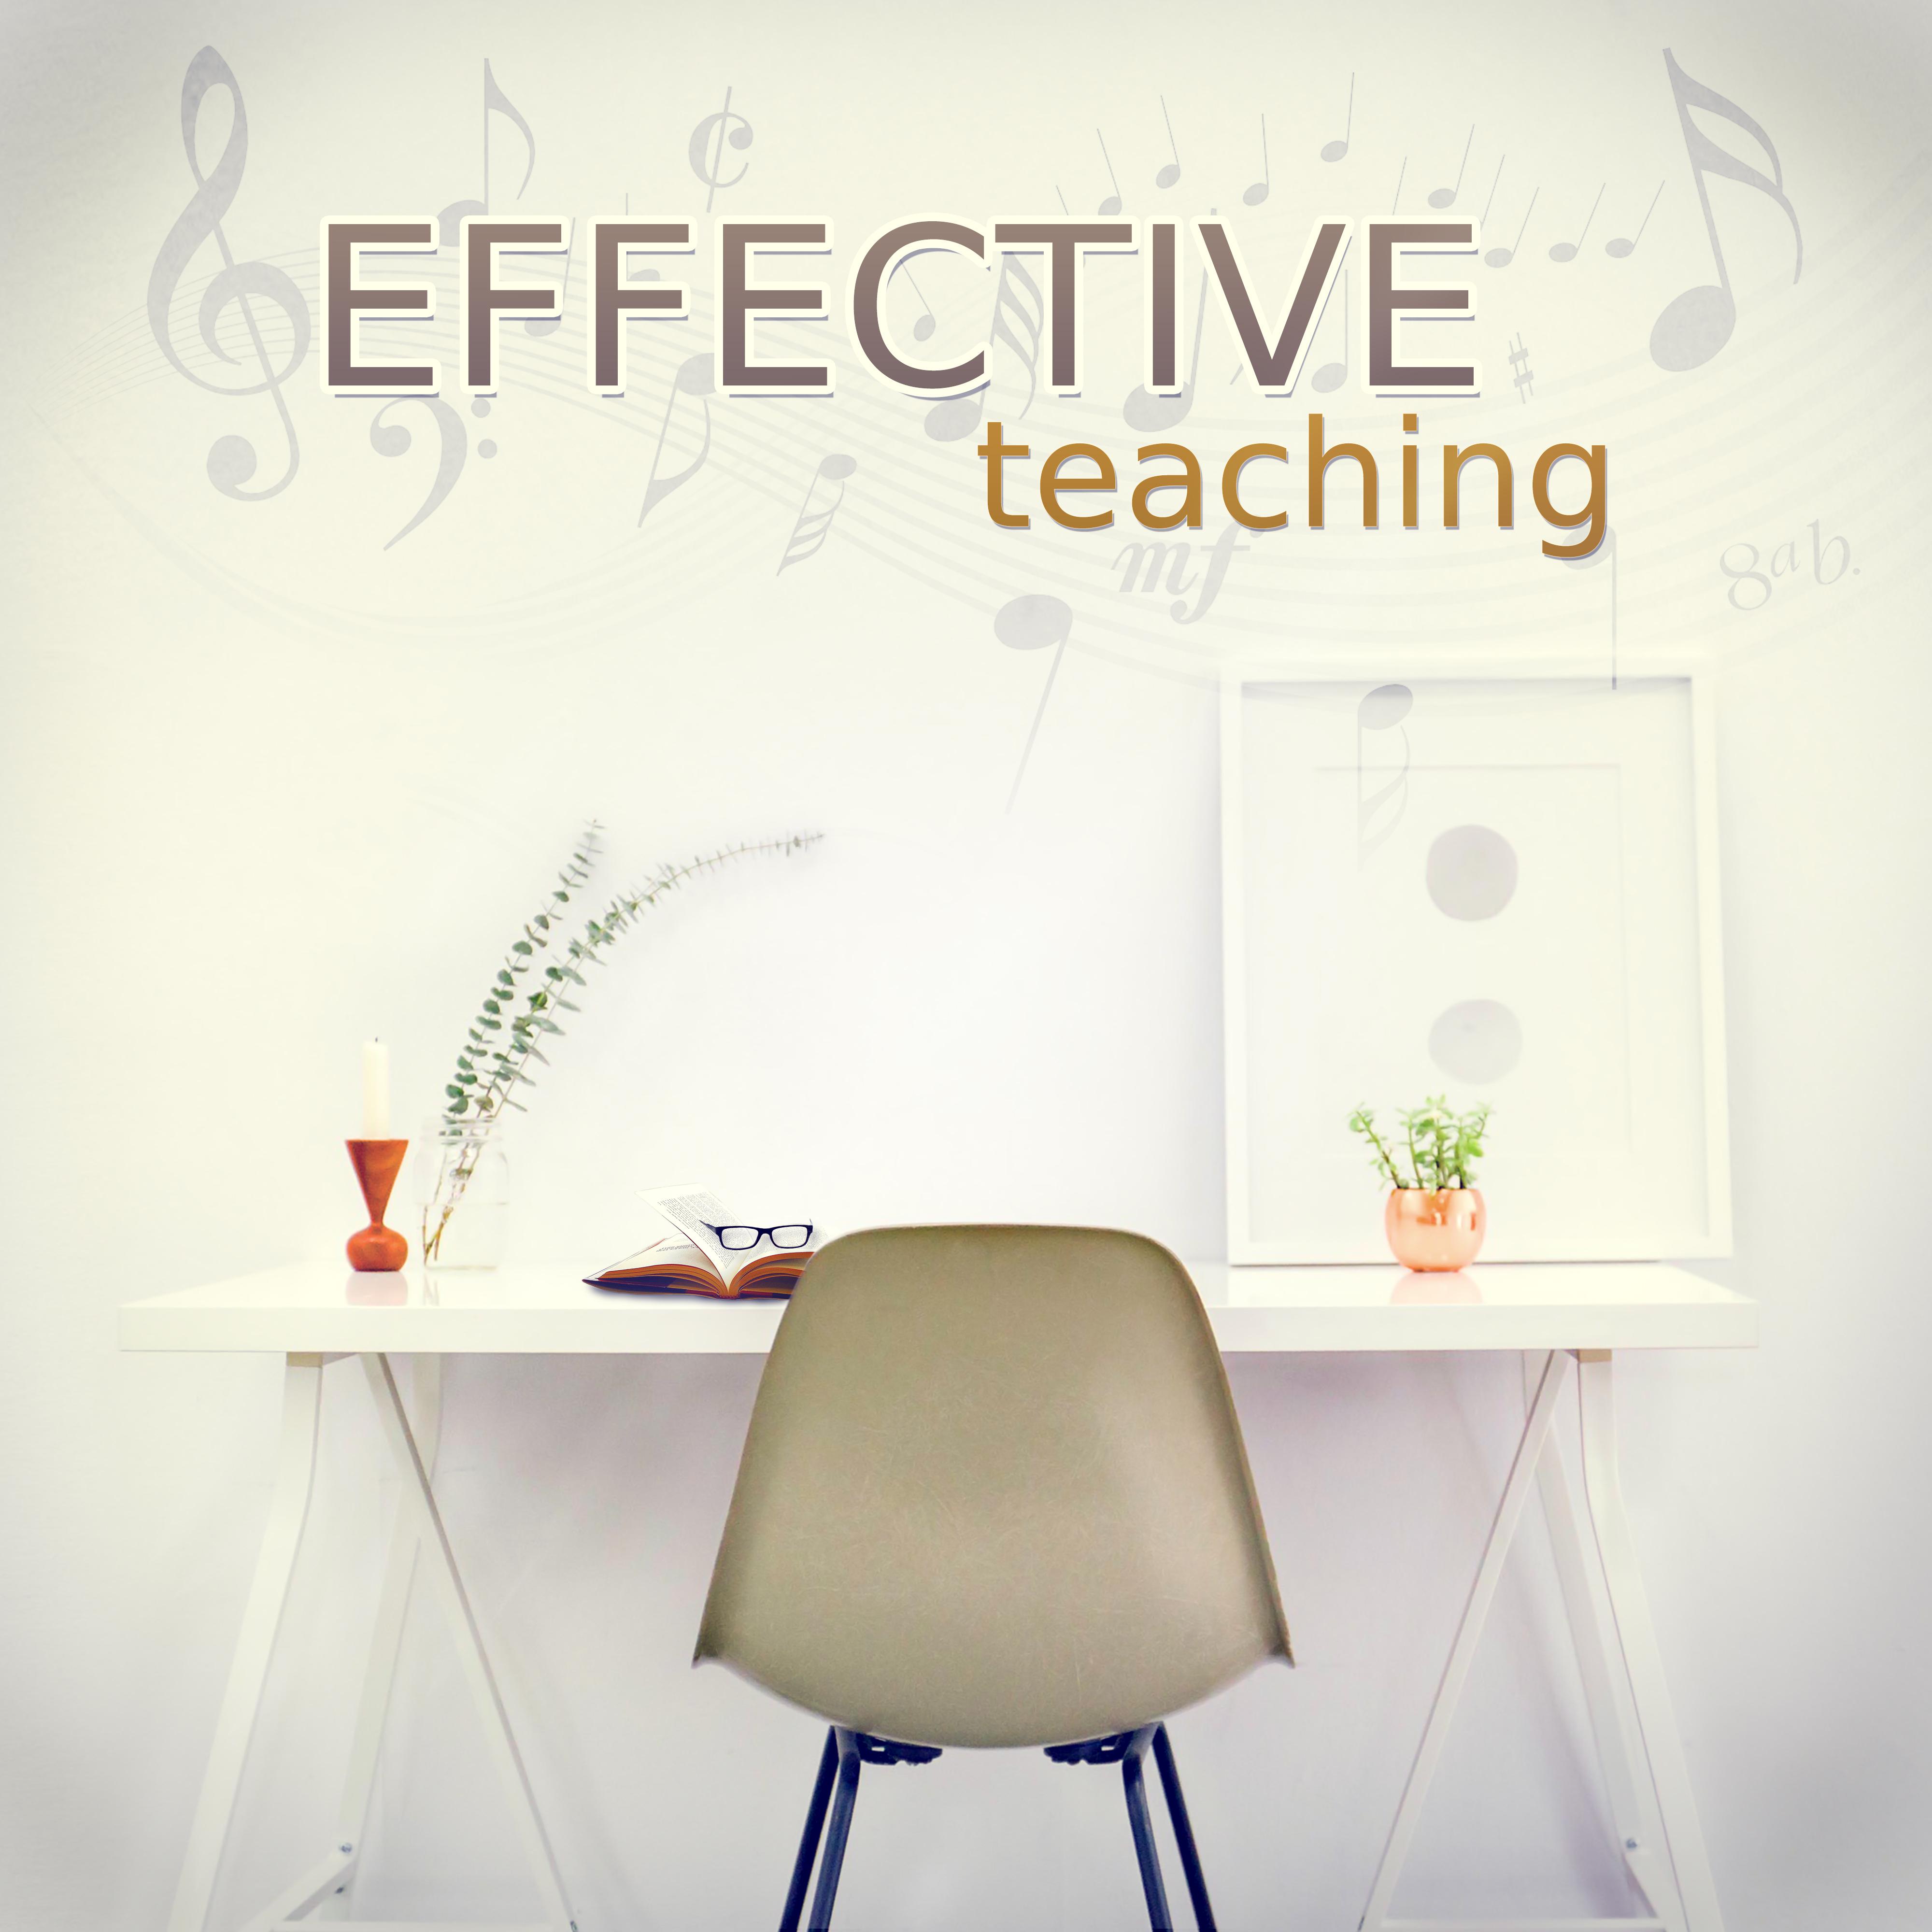 Effective Teaching - Instrumental Music for Concentration, Calm Background Music for Homework, Brain Power